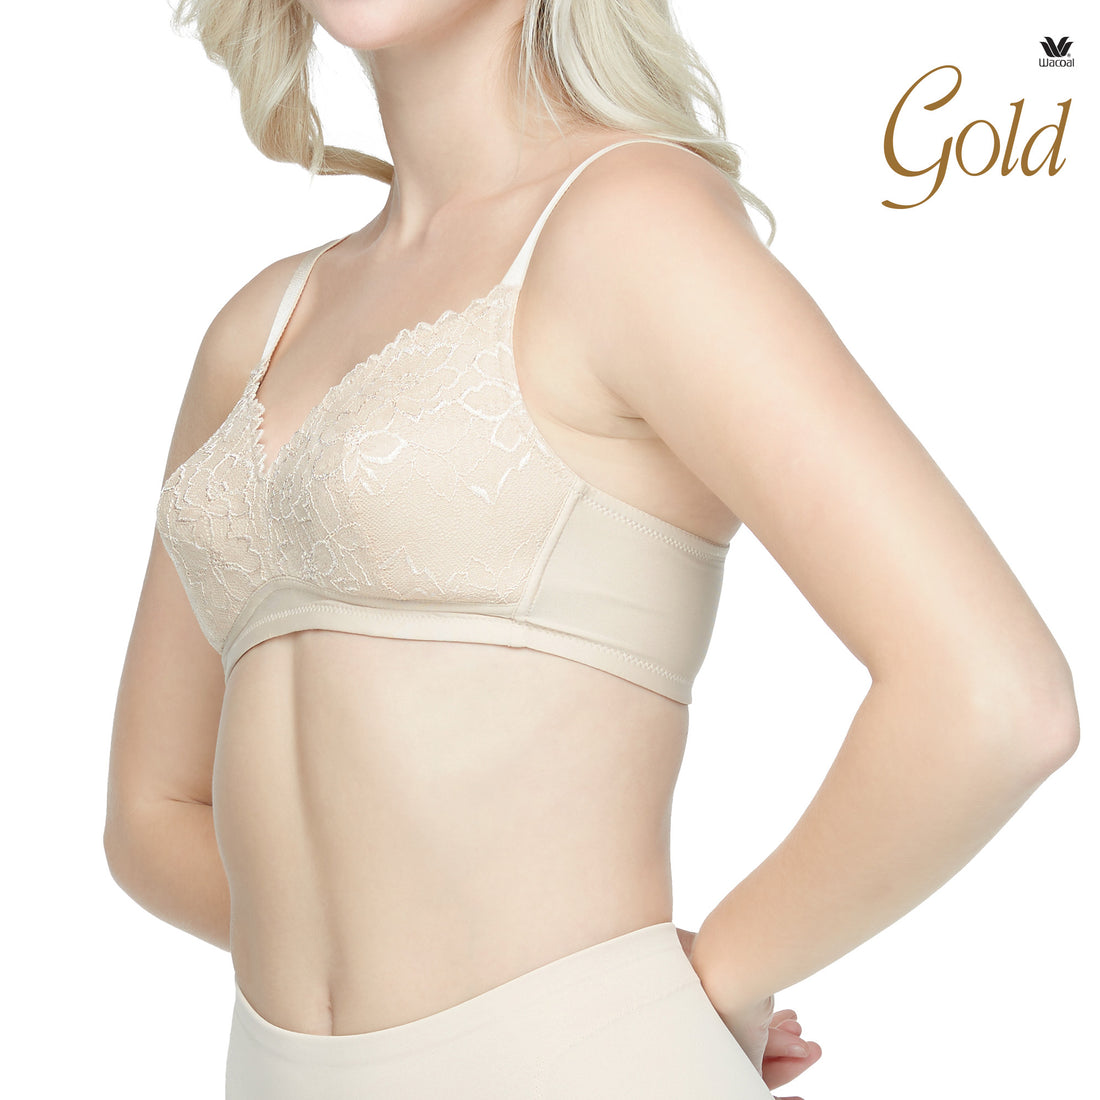 Wacoal Gold wireless health bra No sponge added, model WO1542 (paired with WO3116), flesh color (NN)